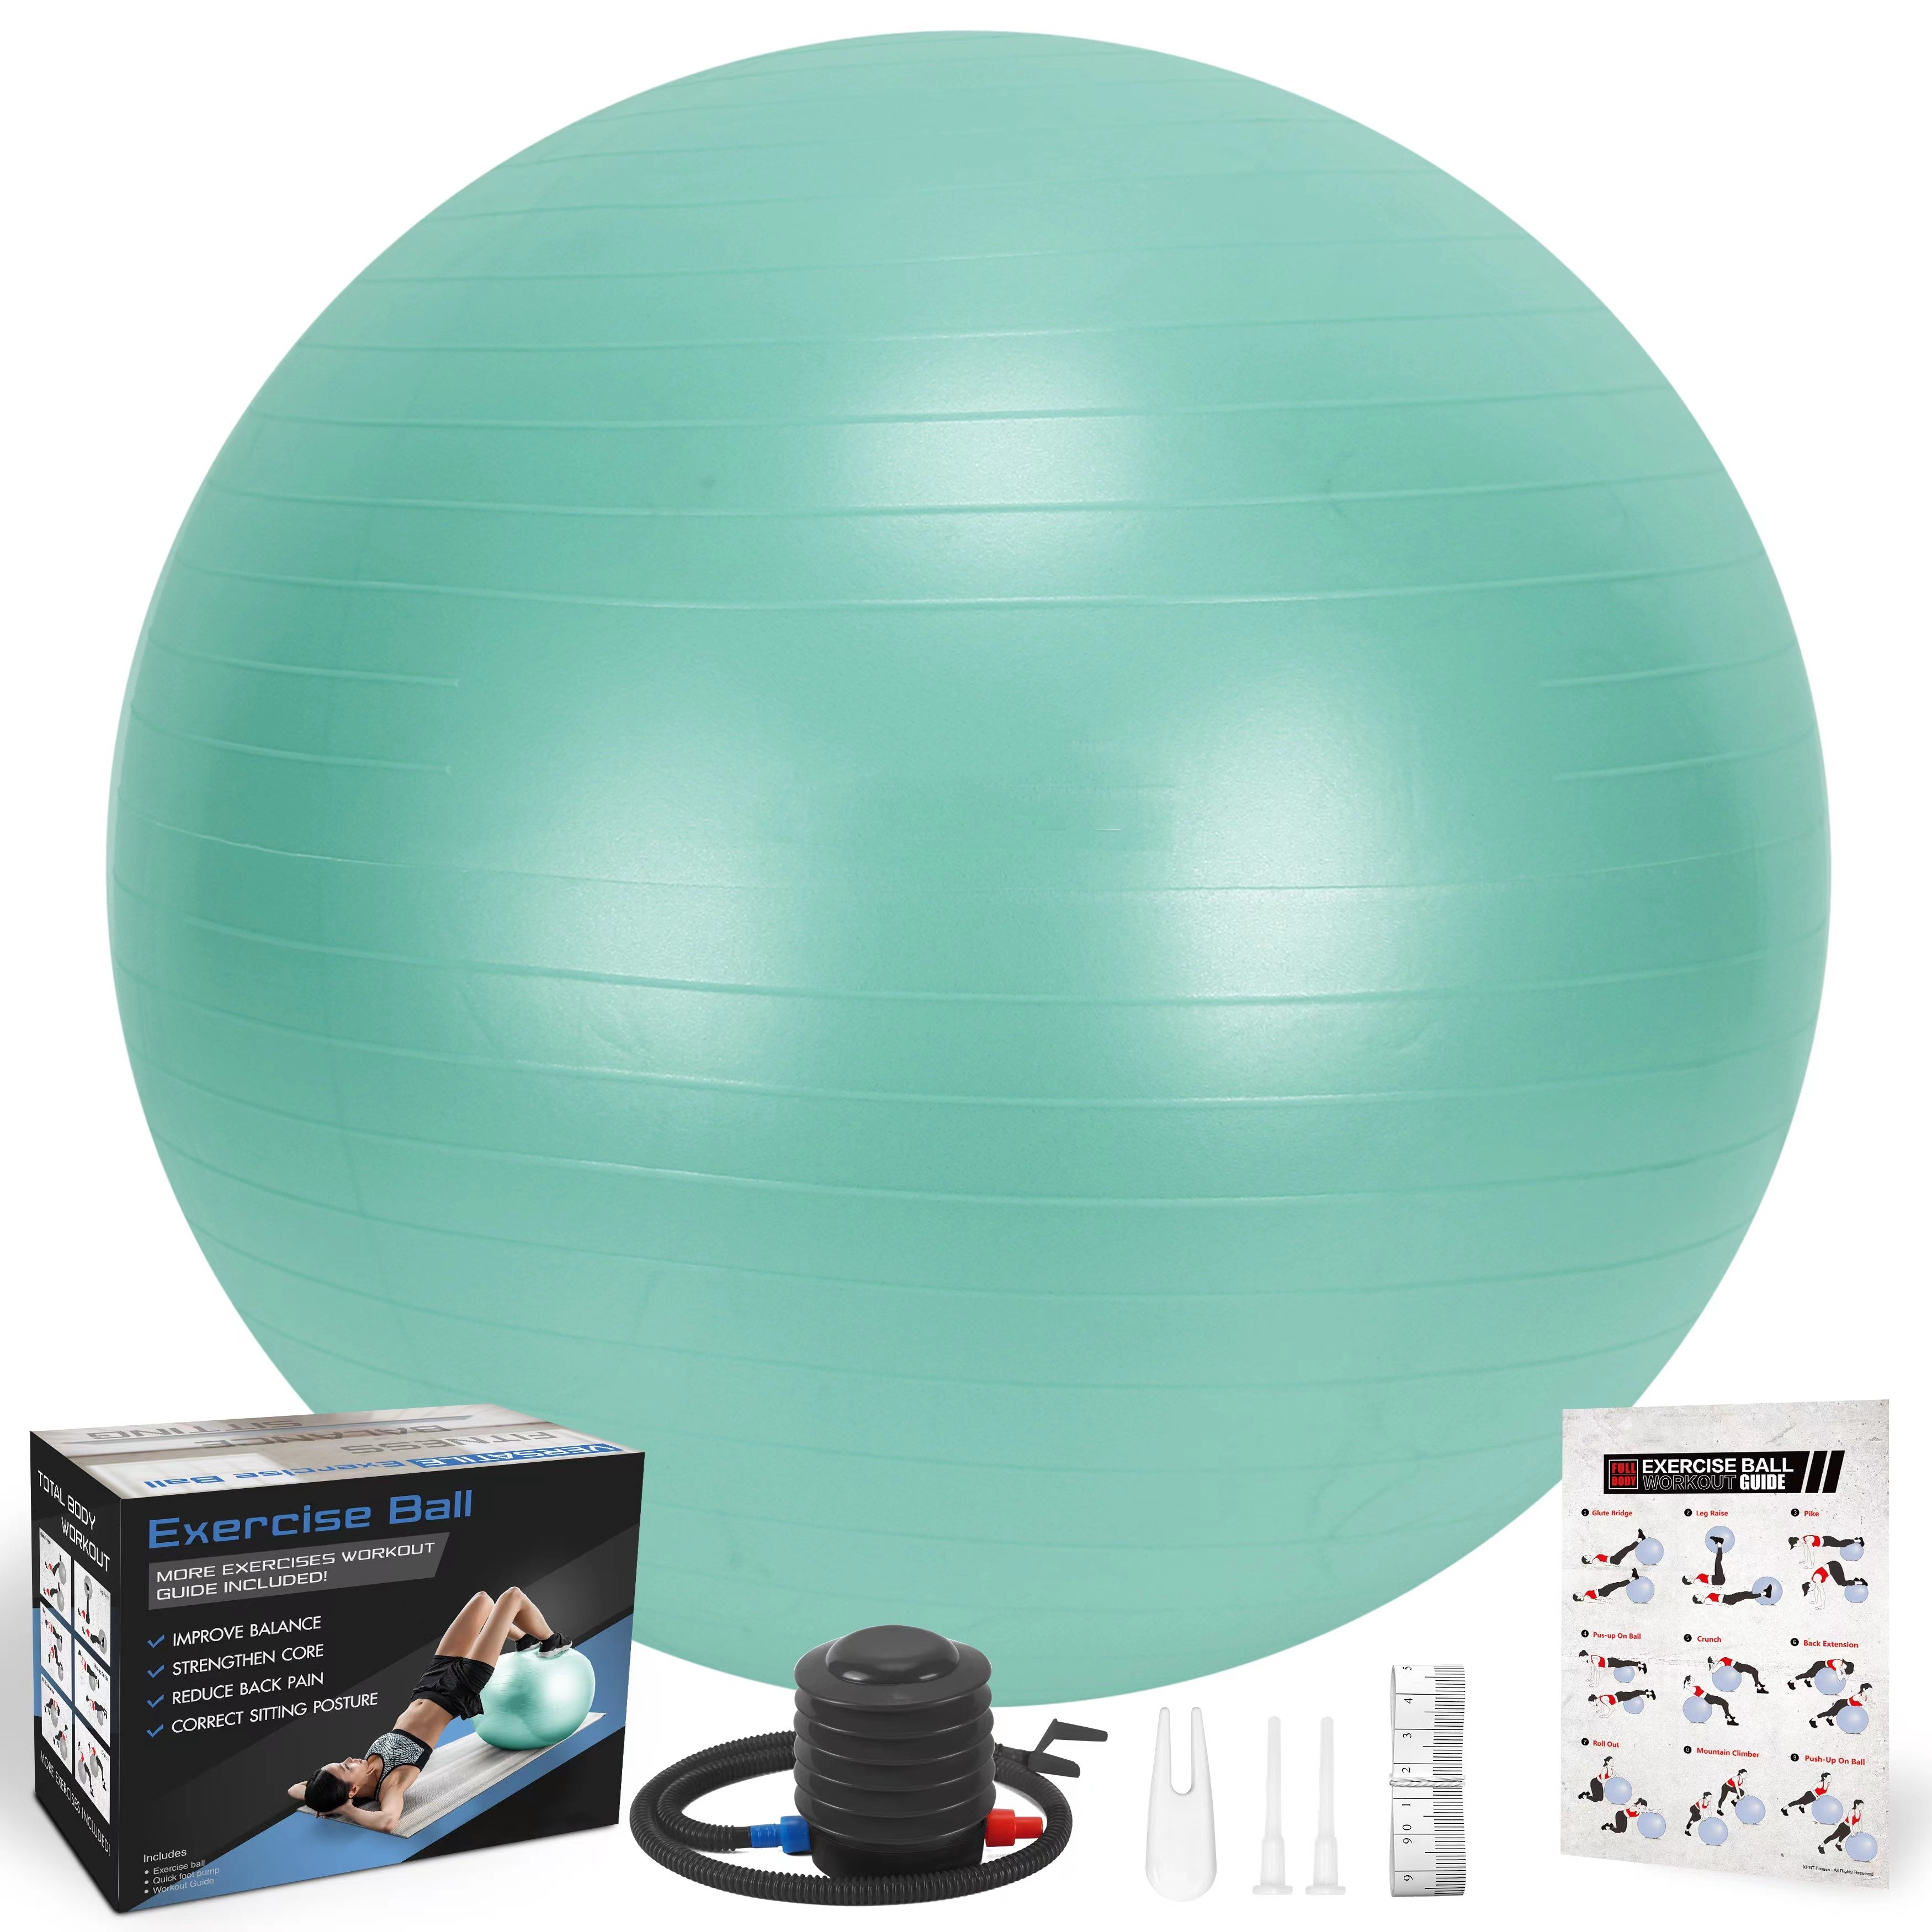 MINT Exercise and Workout Ball, Yoga Ball Chair, Great for Fitness, Balance and Stability Extra-Thick with Quick Pump 